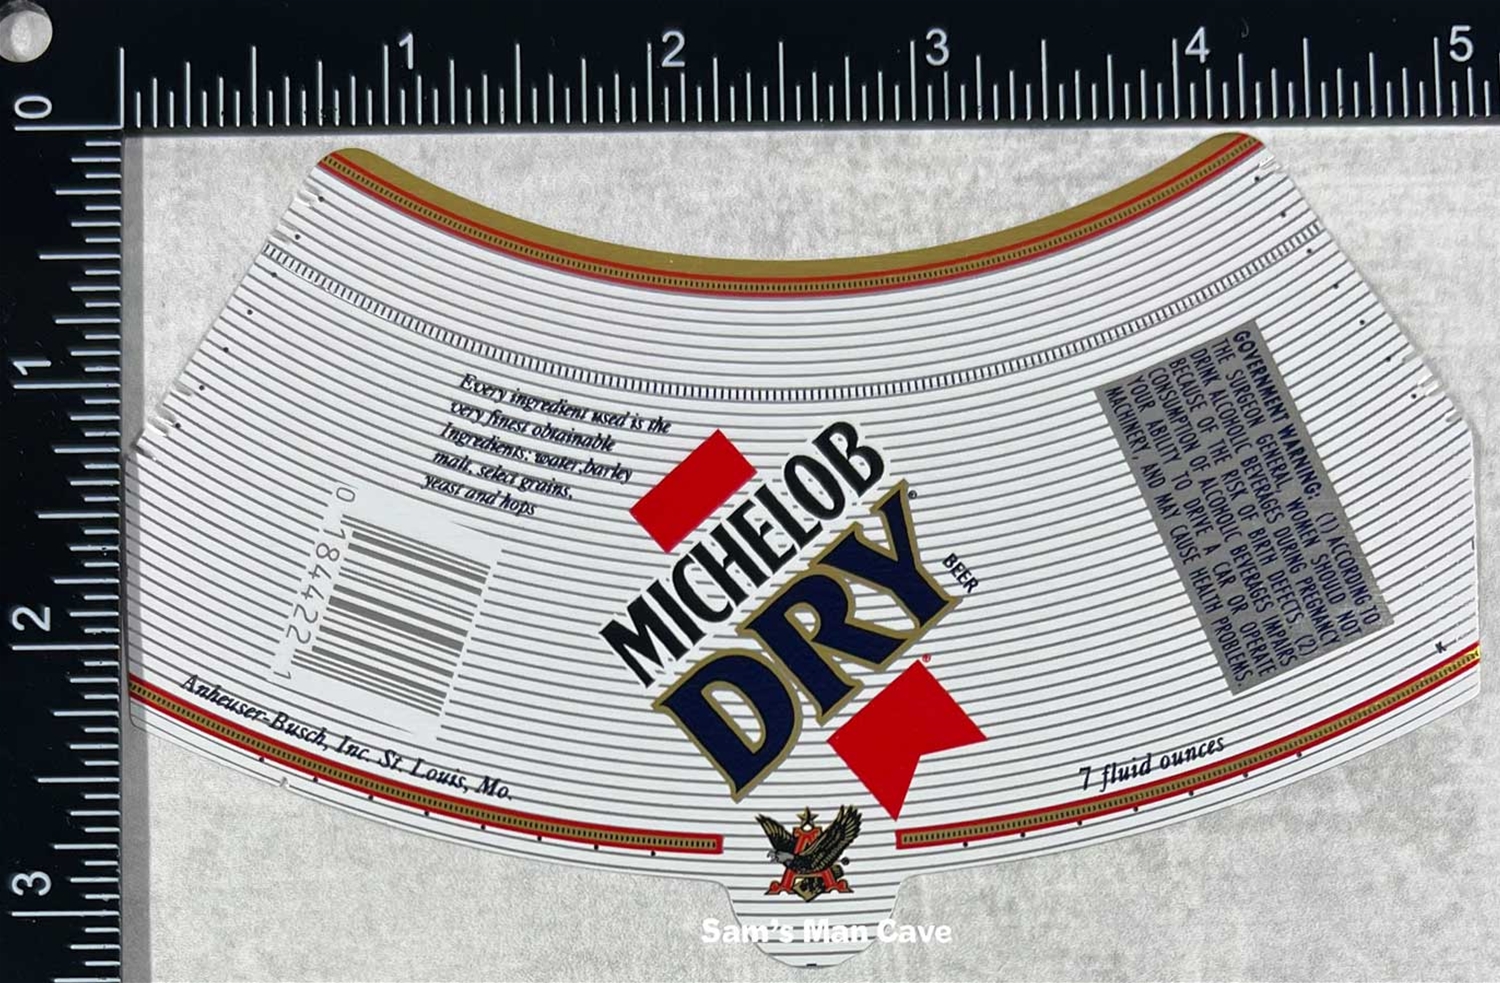 Michelob Dry Beer Label